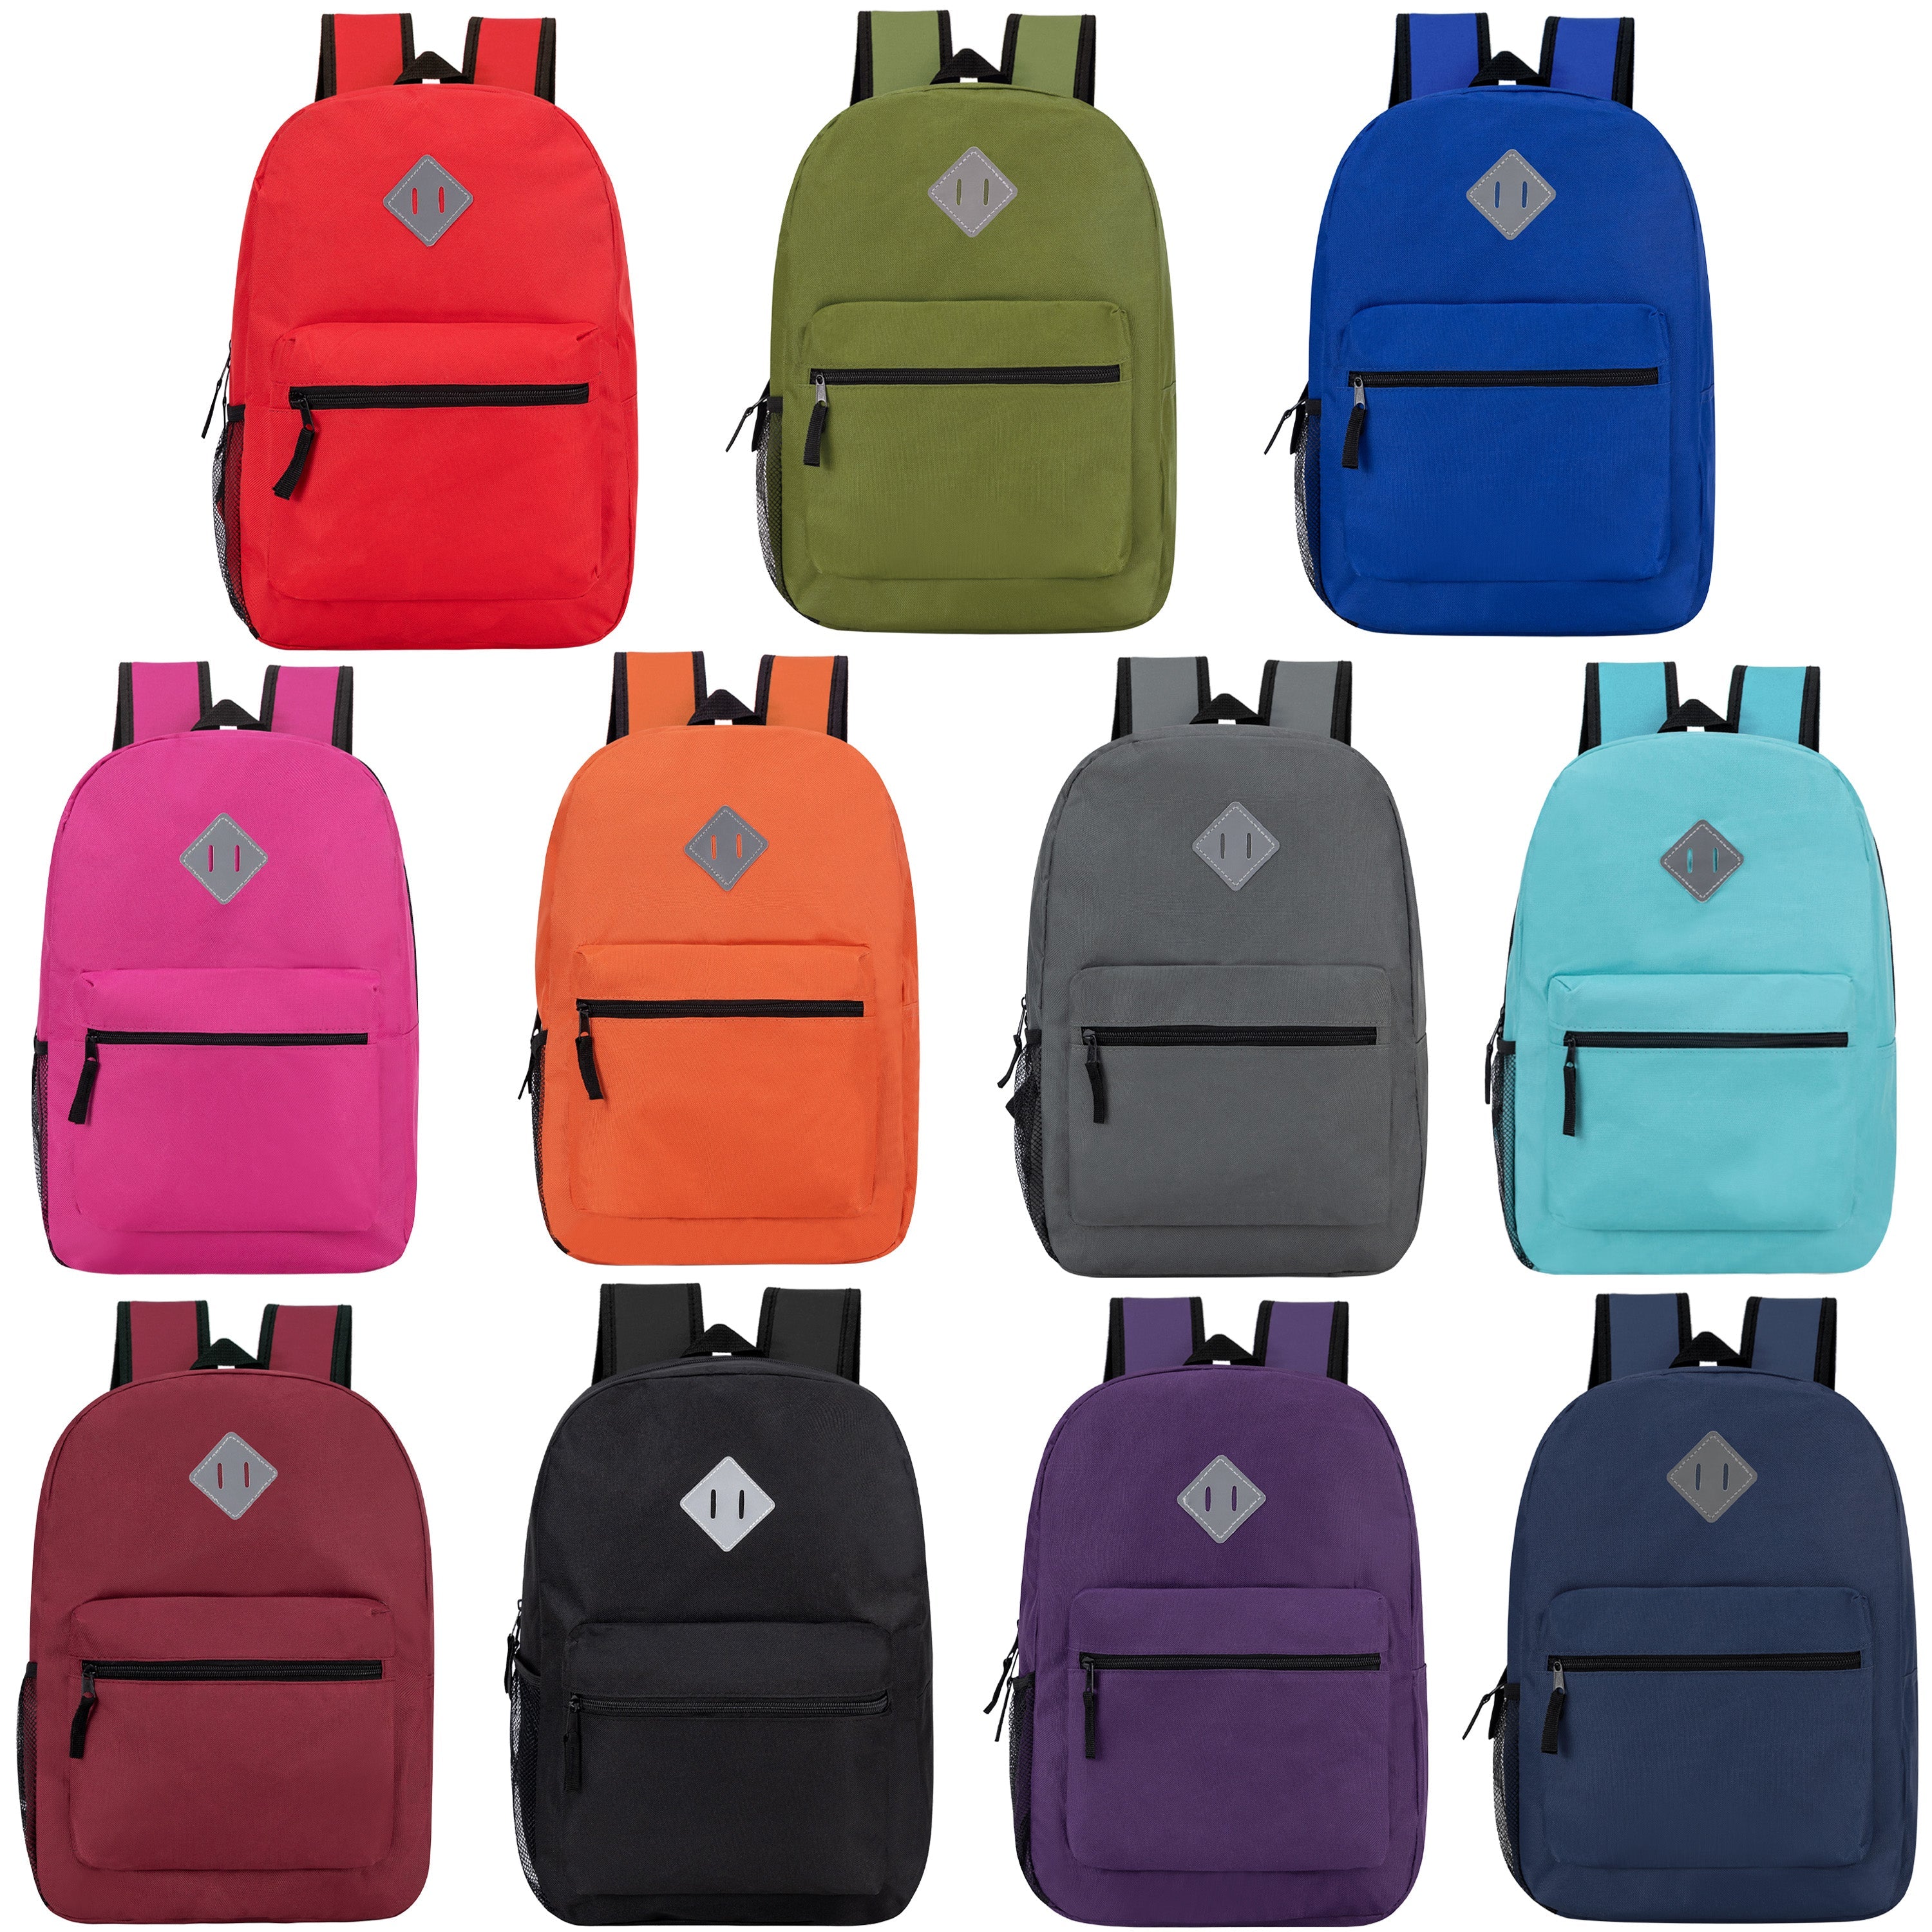 17" Wholesale Diamond Patch Backpack in 11 Assorted Colors - Bulk Case of 24 Bookbags